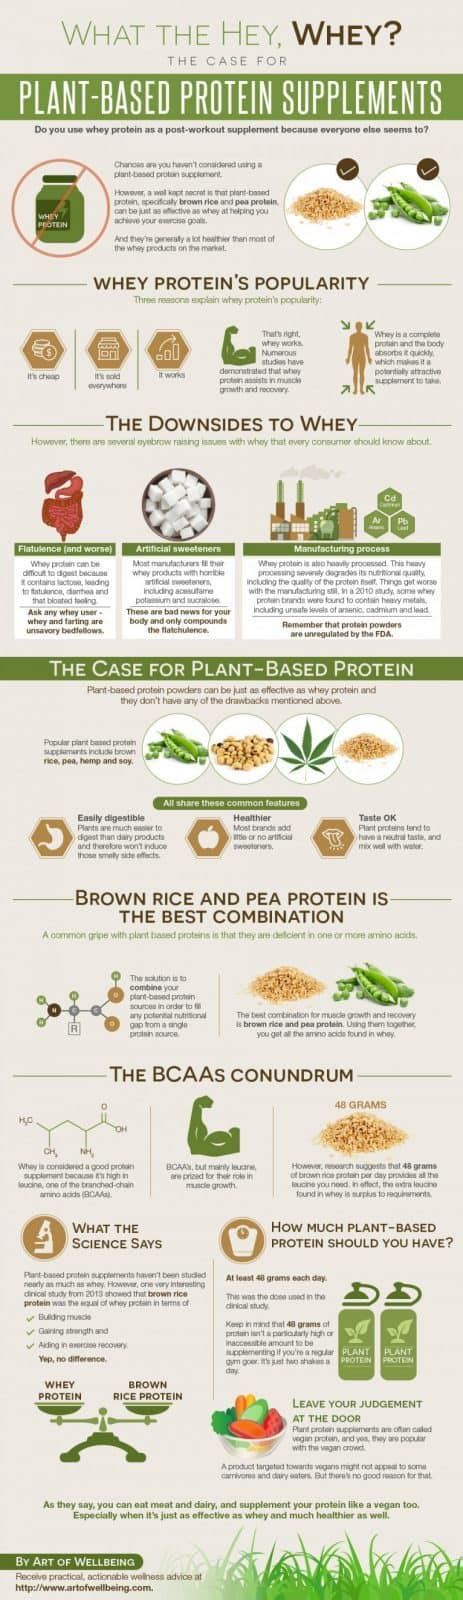 infographic plant based protein supplements